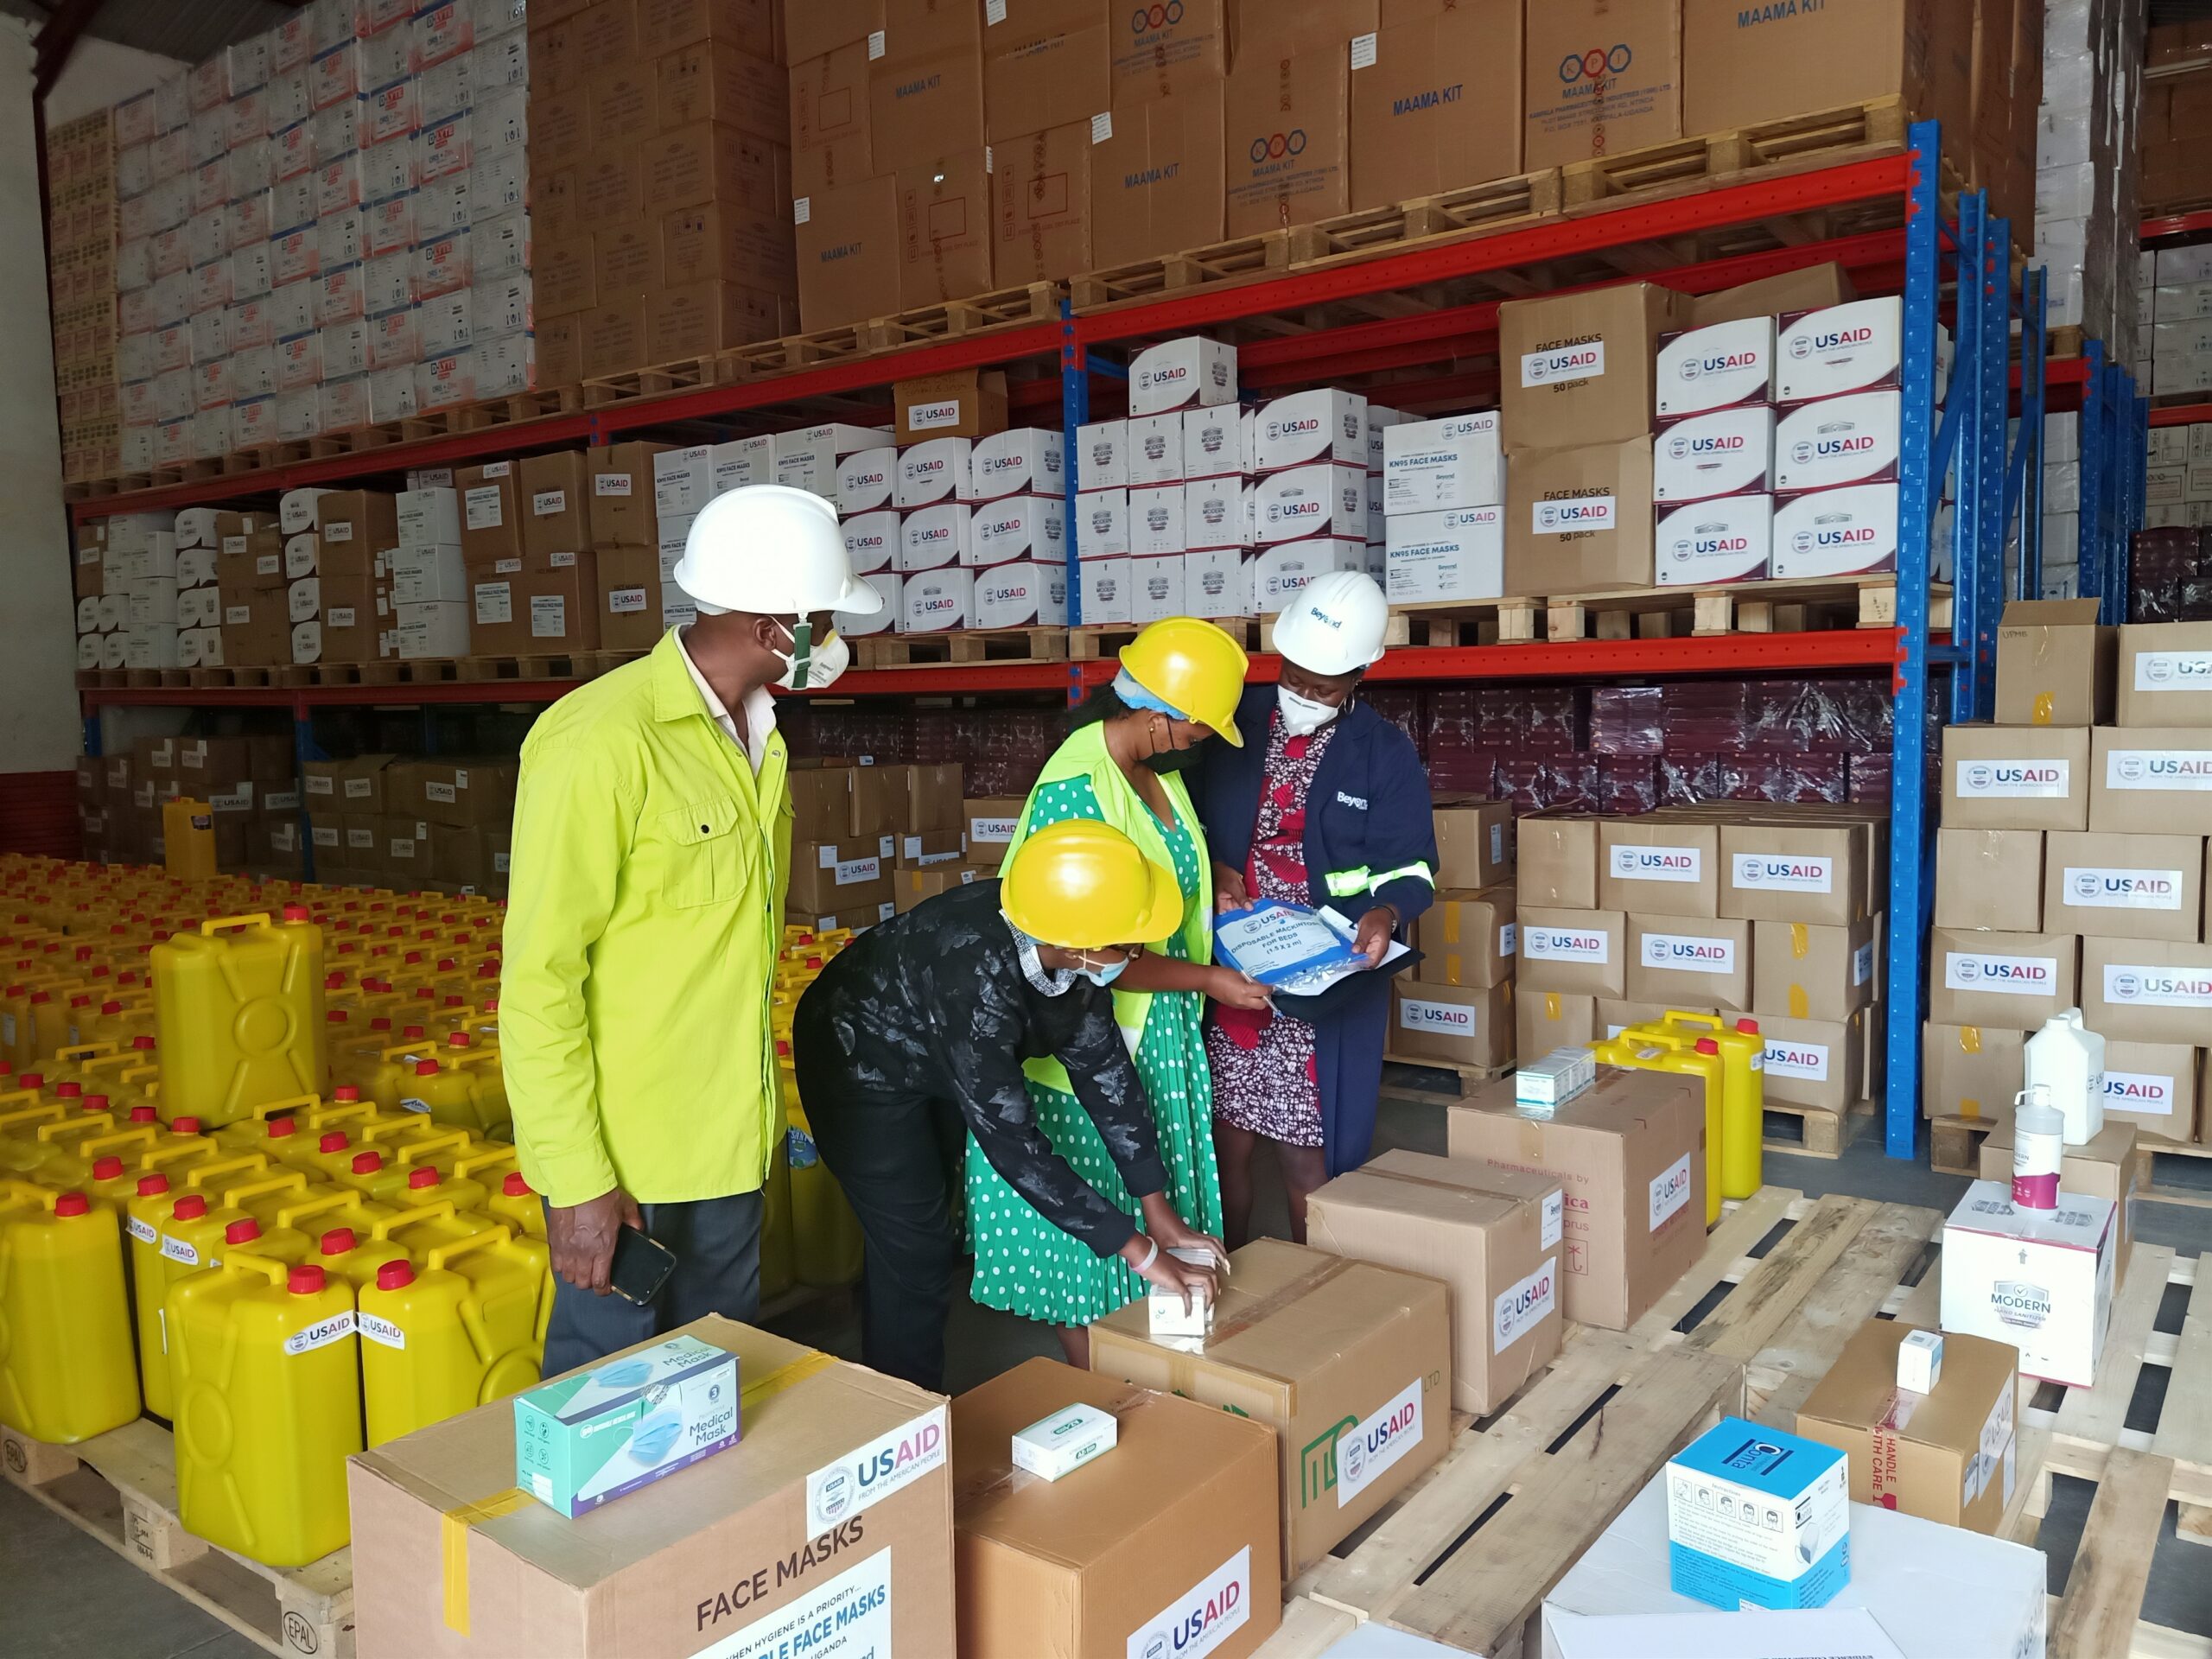 Inspection of procured items before distribution